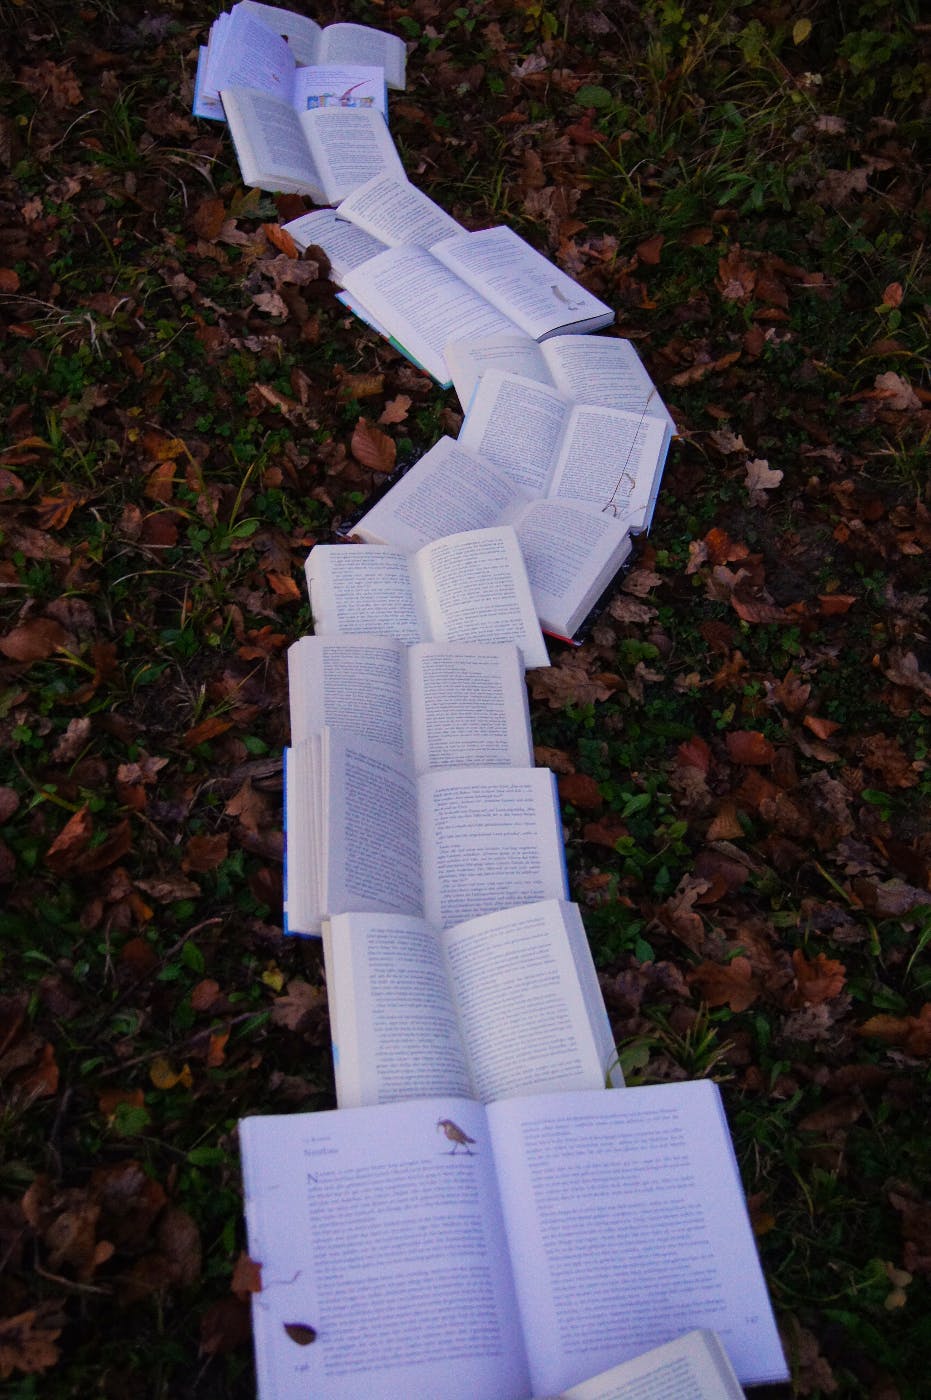 a path on the ground made from open books